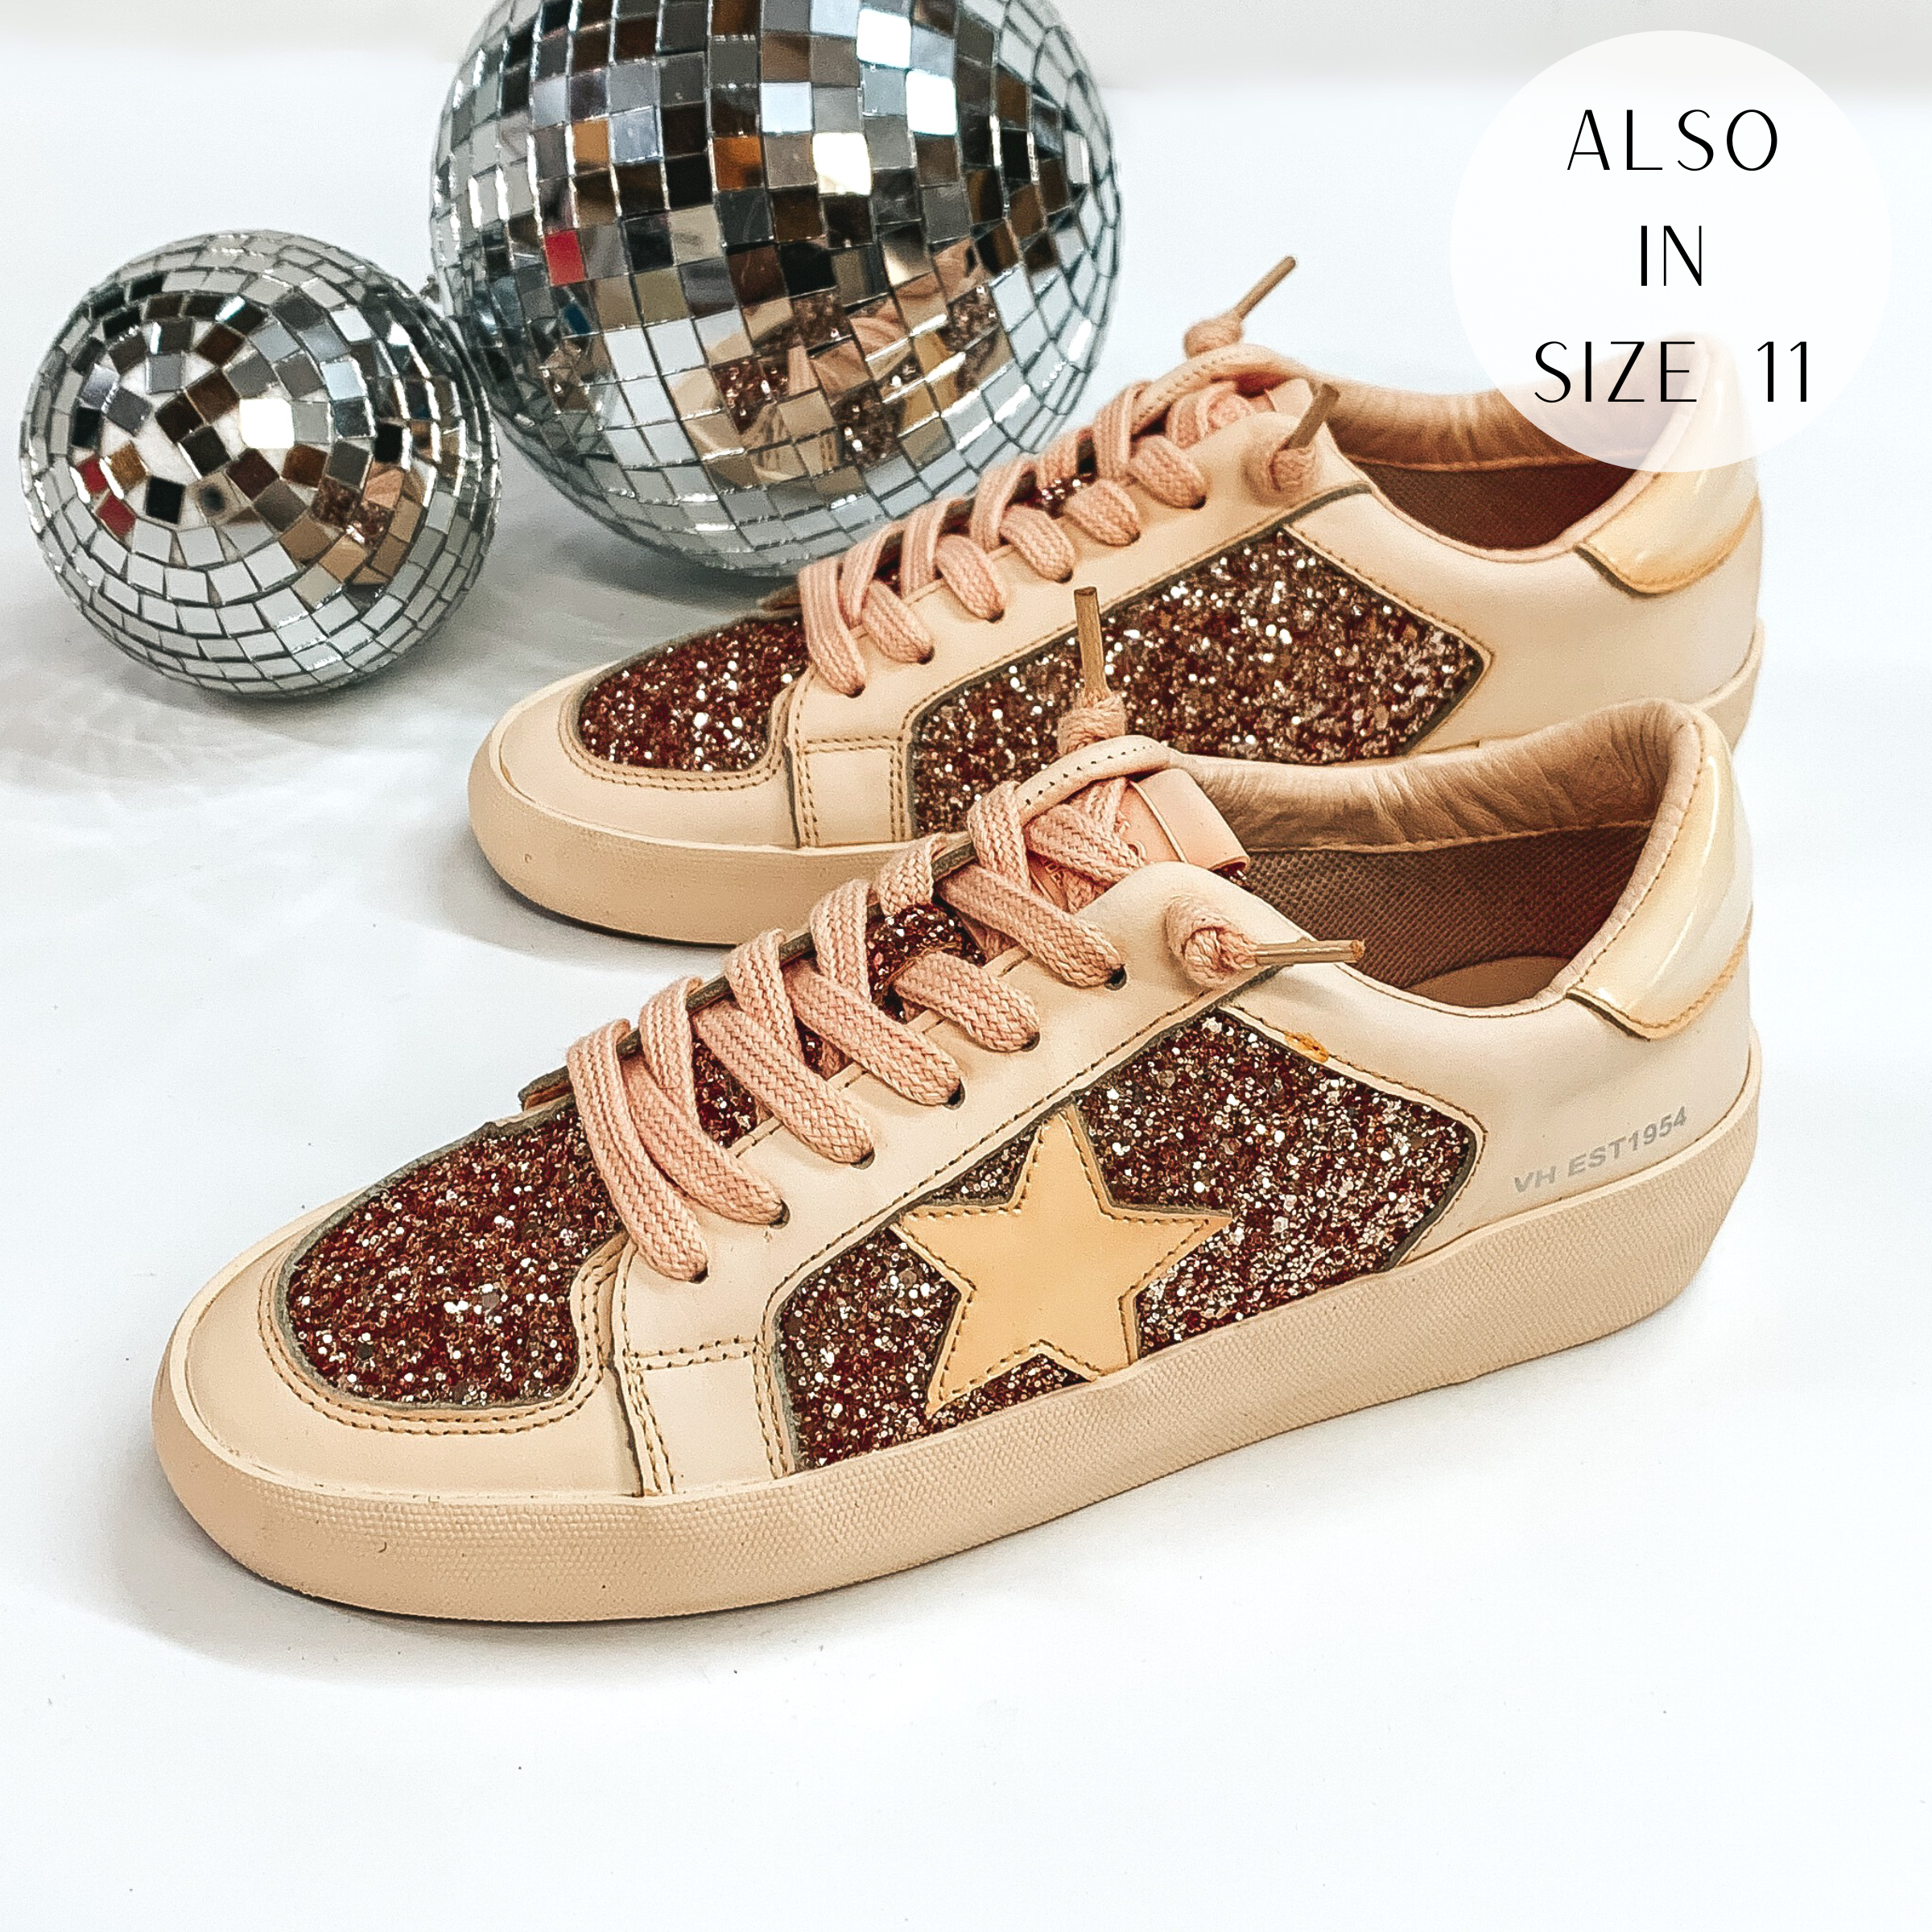 Pictured are a beige colored pair of sneakers with rose gold glitter throughout. These shoes are pictured on a white background with disco balls in the background.